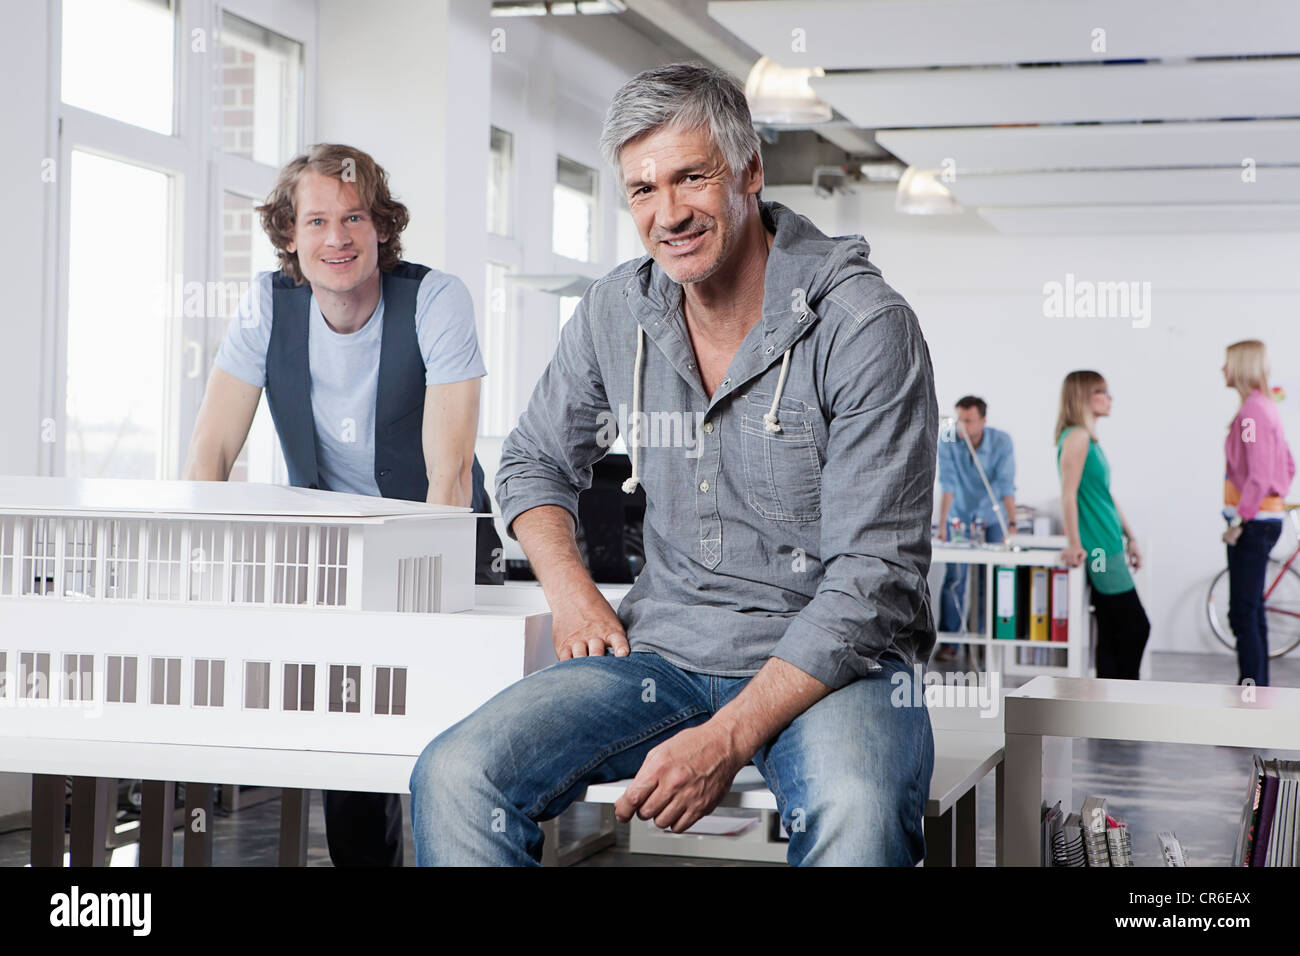 Germany, Bavaria, Munich, Men with architectural model in office, colleagues talking in background Stock Photo